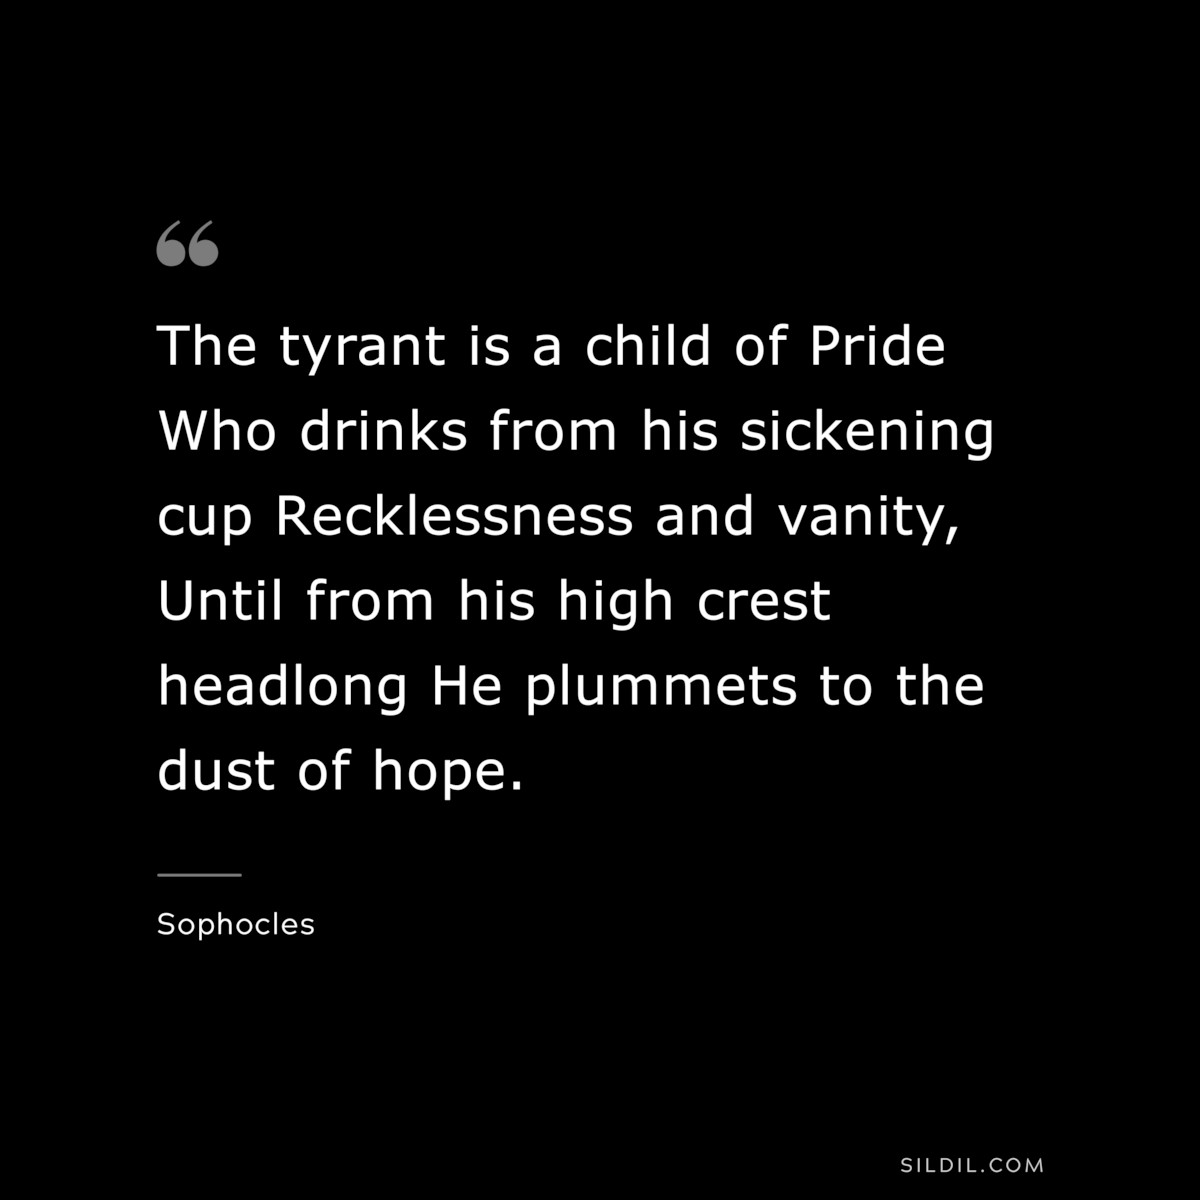 The tyrant is a child of Pride Who drinks from his sickening cup Recklessness and vanity, Until from his high crest headlong He plummets to the dust of hope. ― Sophocles